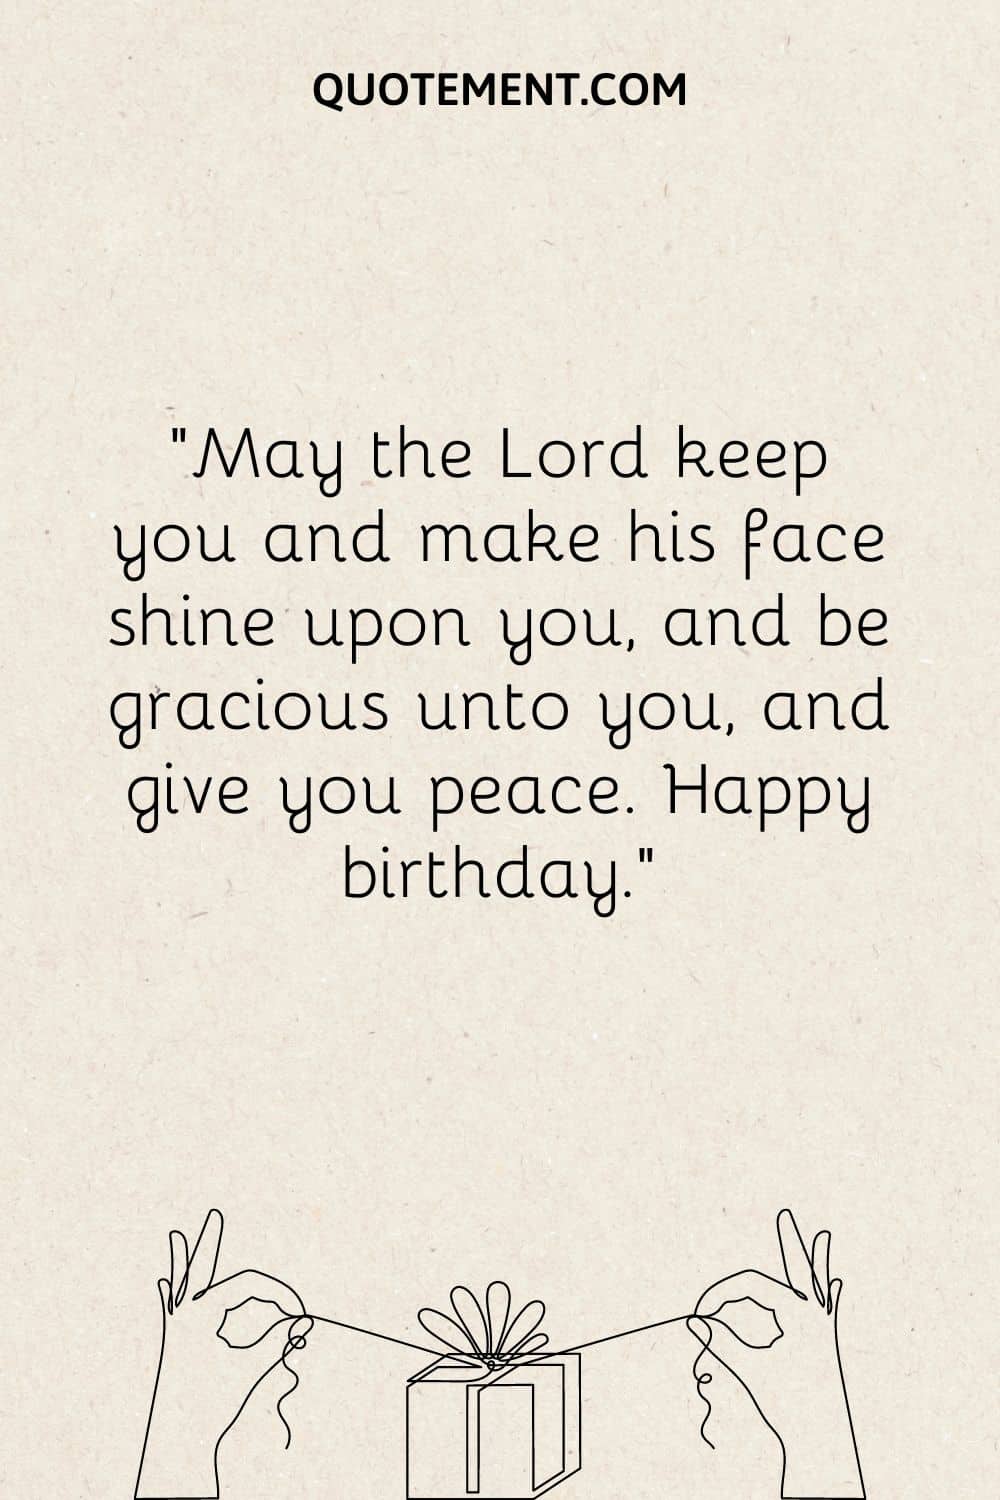 May the Lord keep you and make his face shine upon you, and be gracious unto you, and give you peace. Happy birthday.